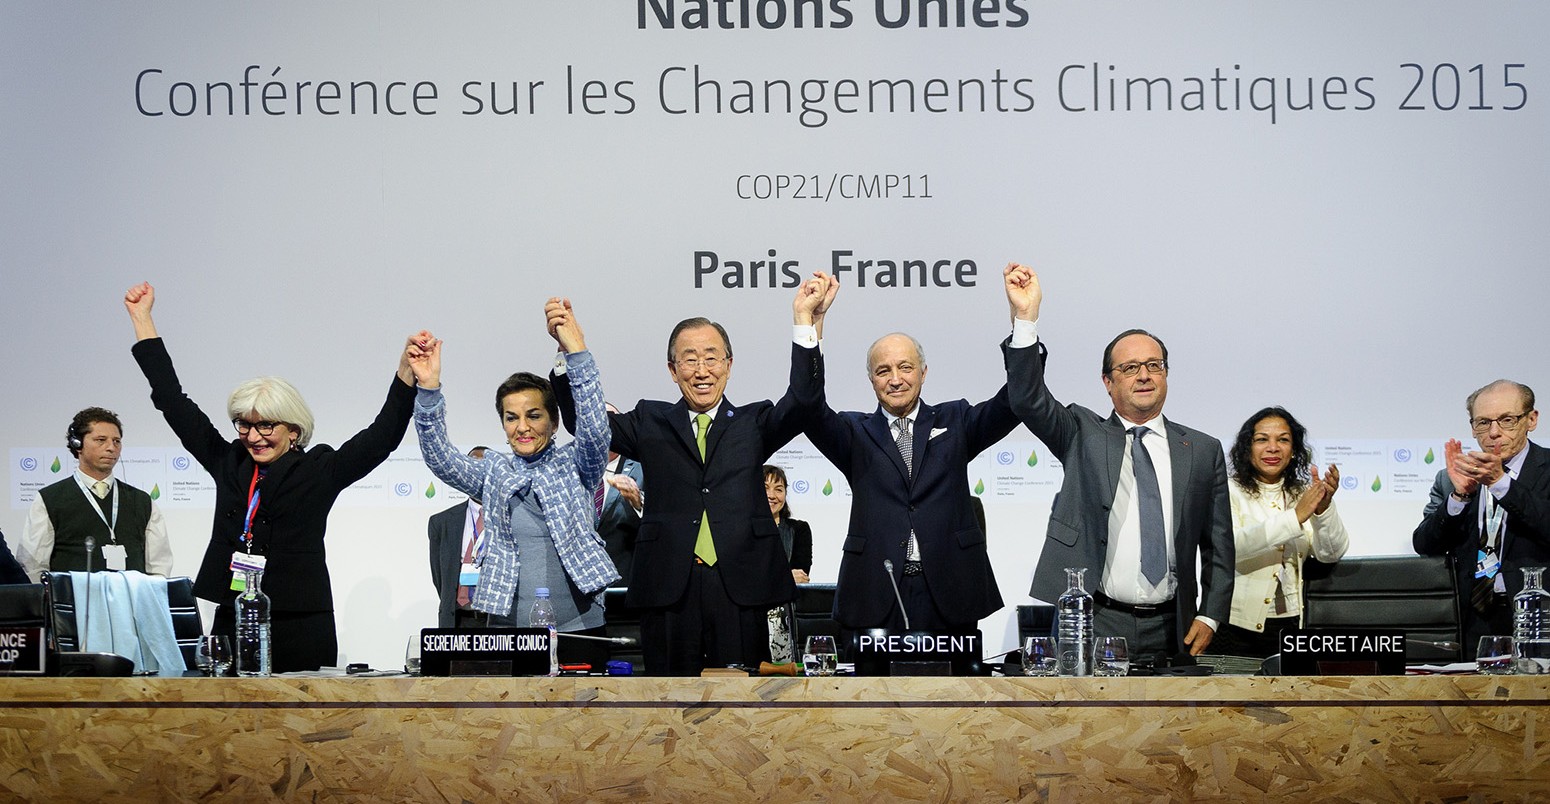 COP 21 - The hardest path is ahead of us!